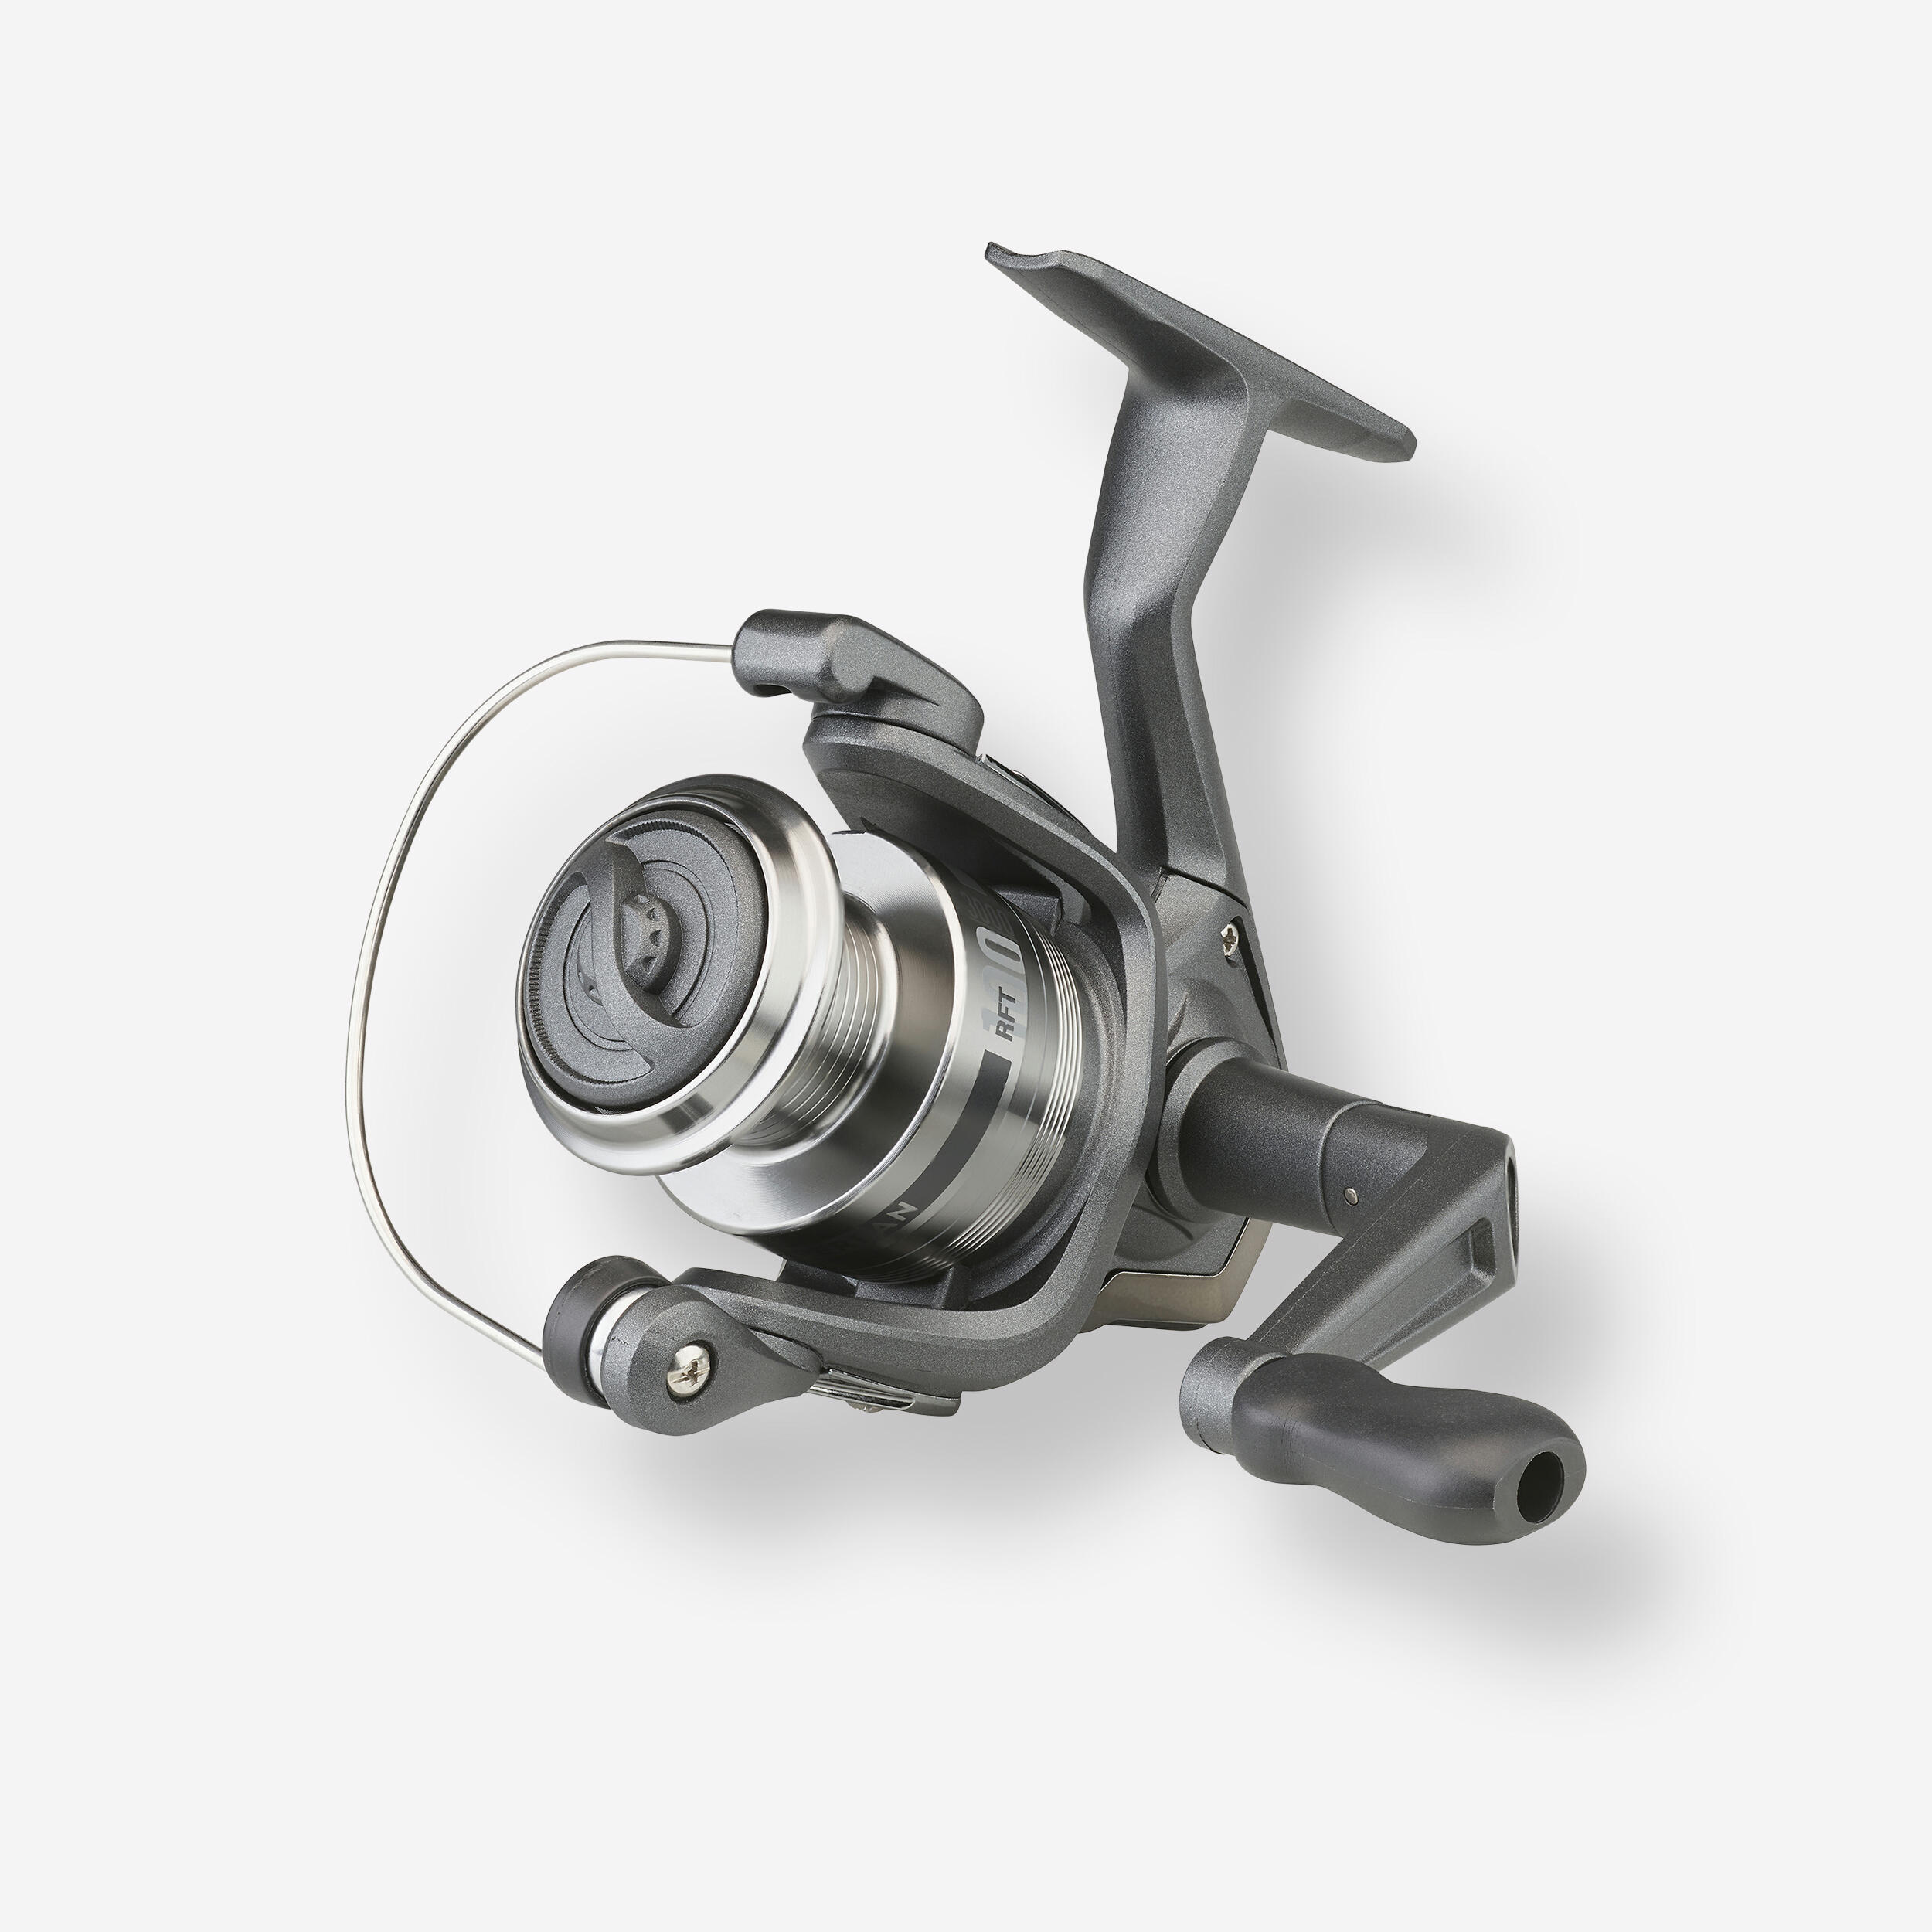 Caperlan Fishing Reel RFT 100 - 3000 - One Size